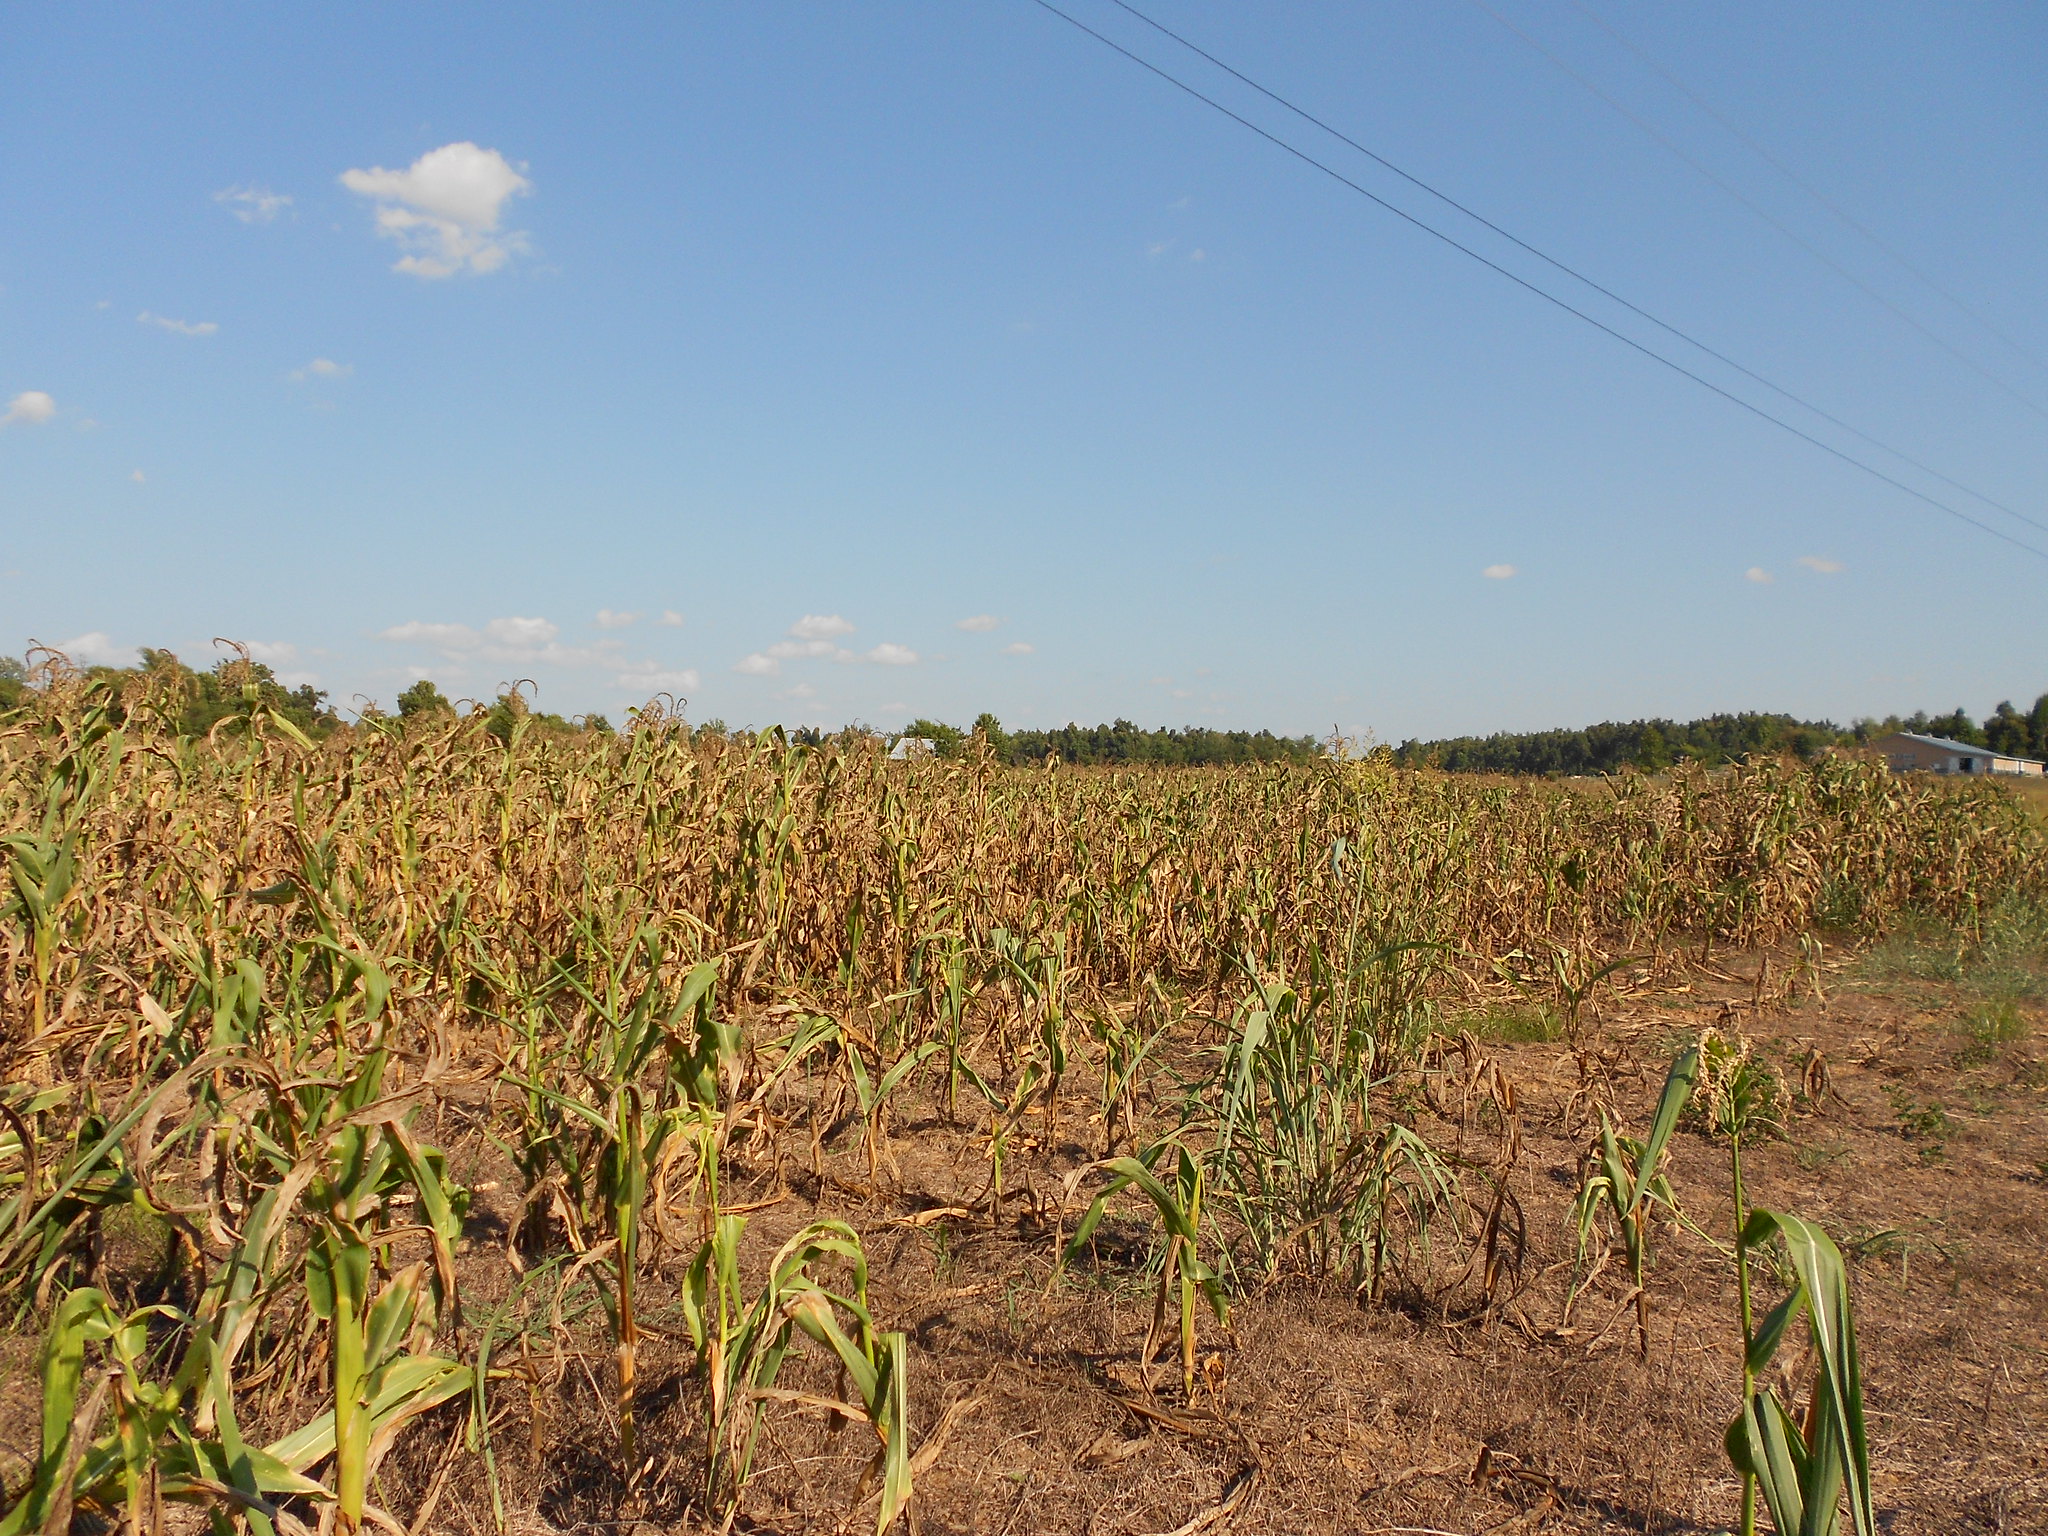 A corn field with corn plants appearing wilted